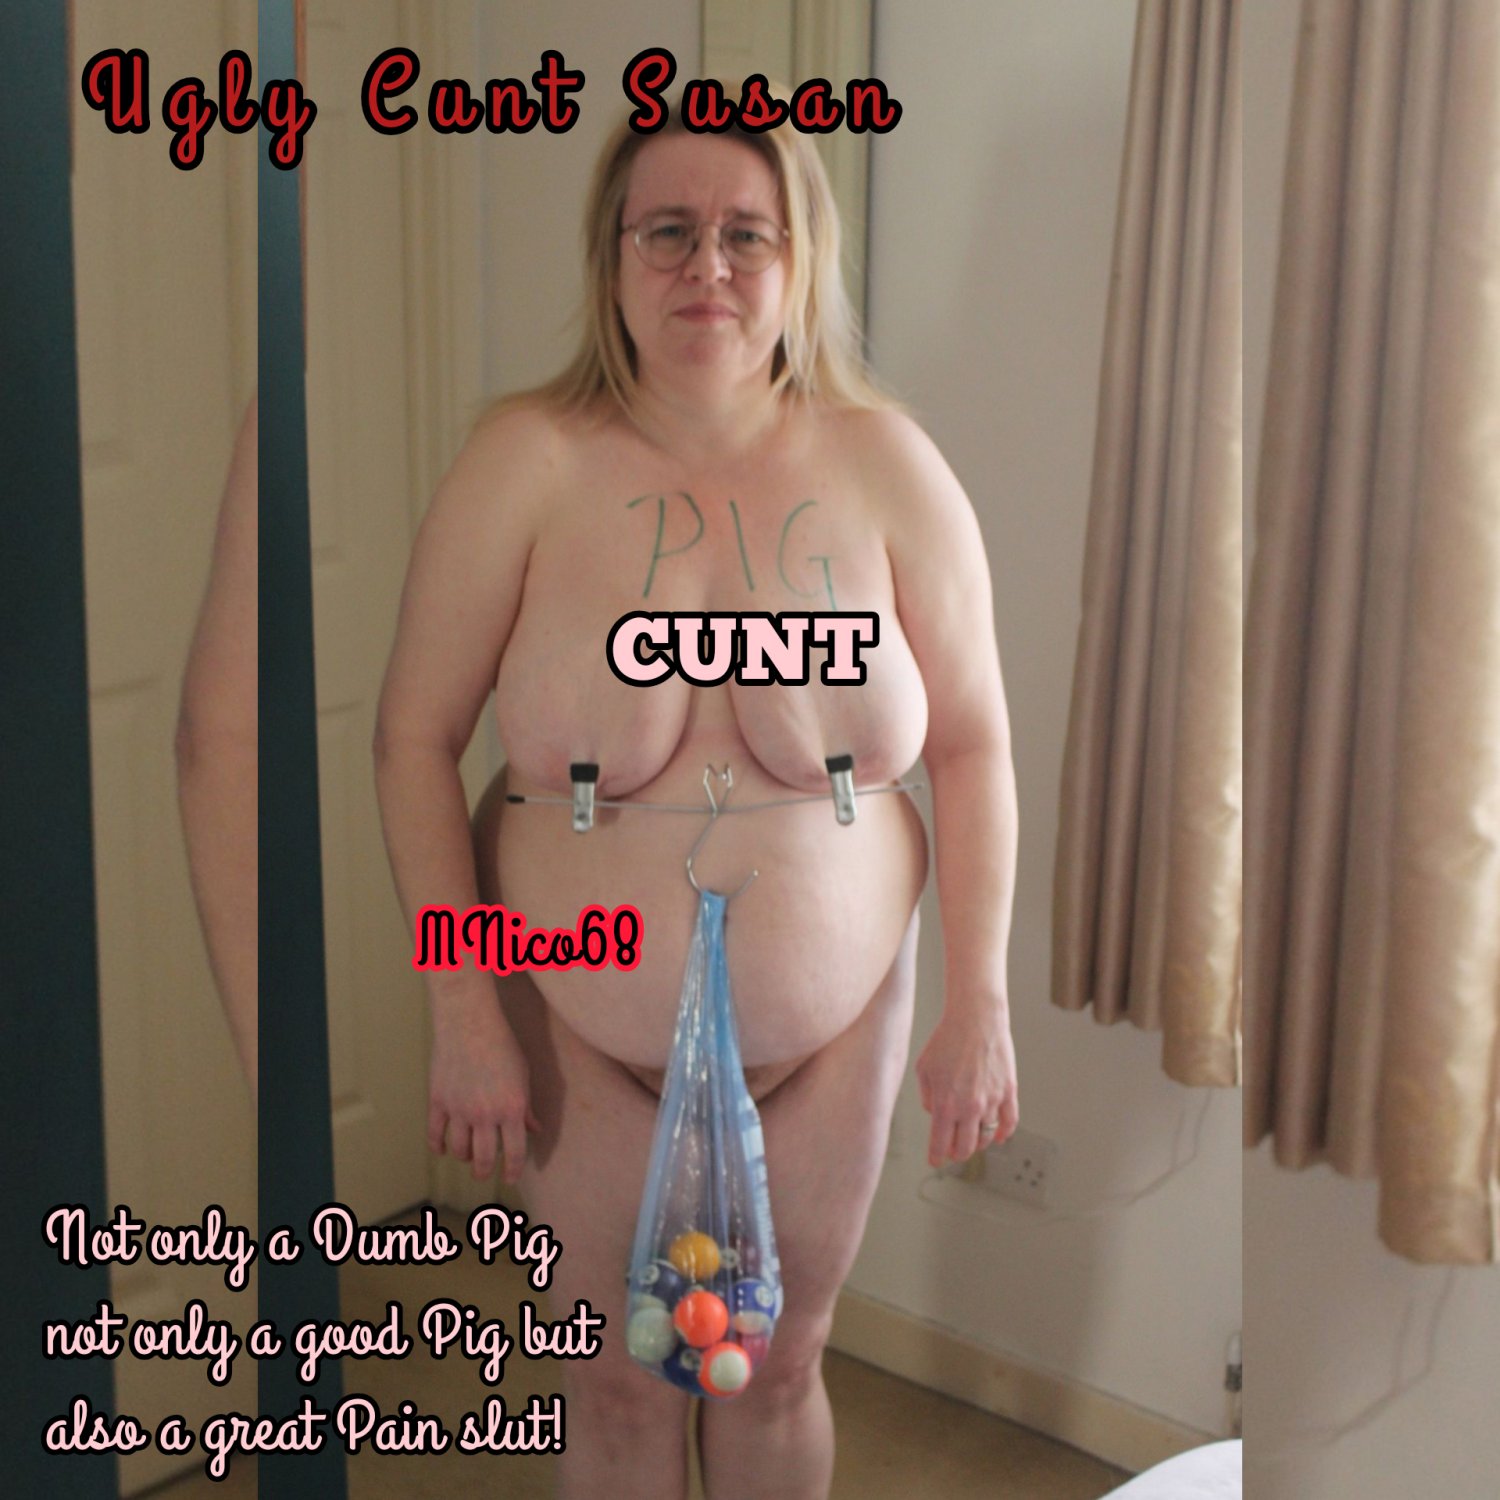 Ugly Cunt Susan, UK Fat Pig to use/abuse/humiliation,comment on... photo photo picture